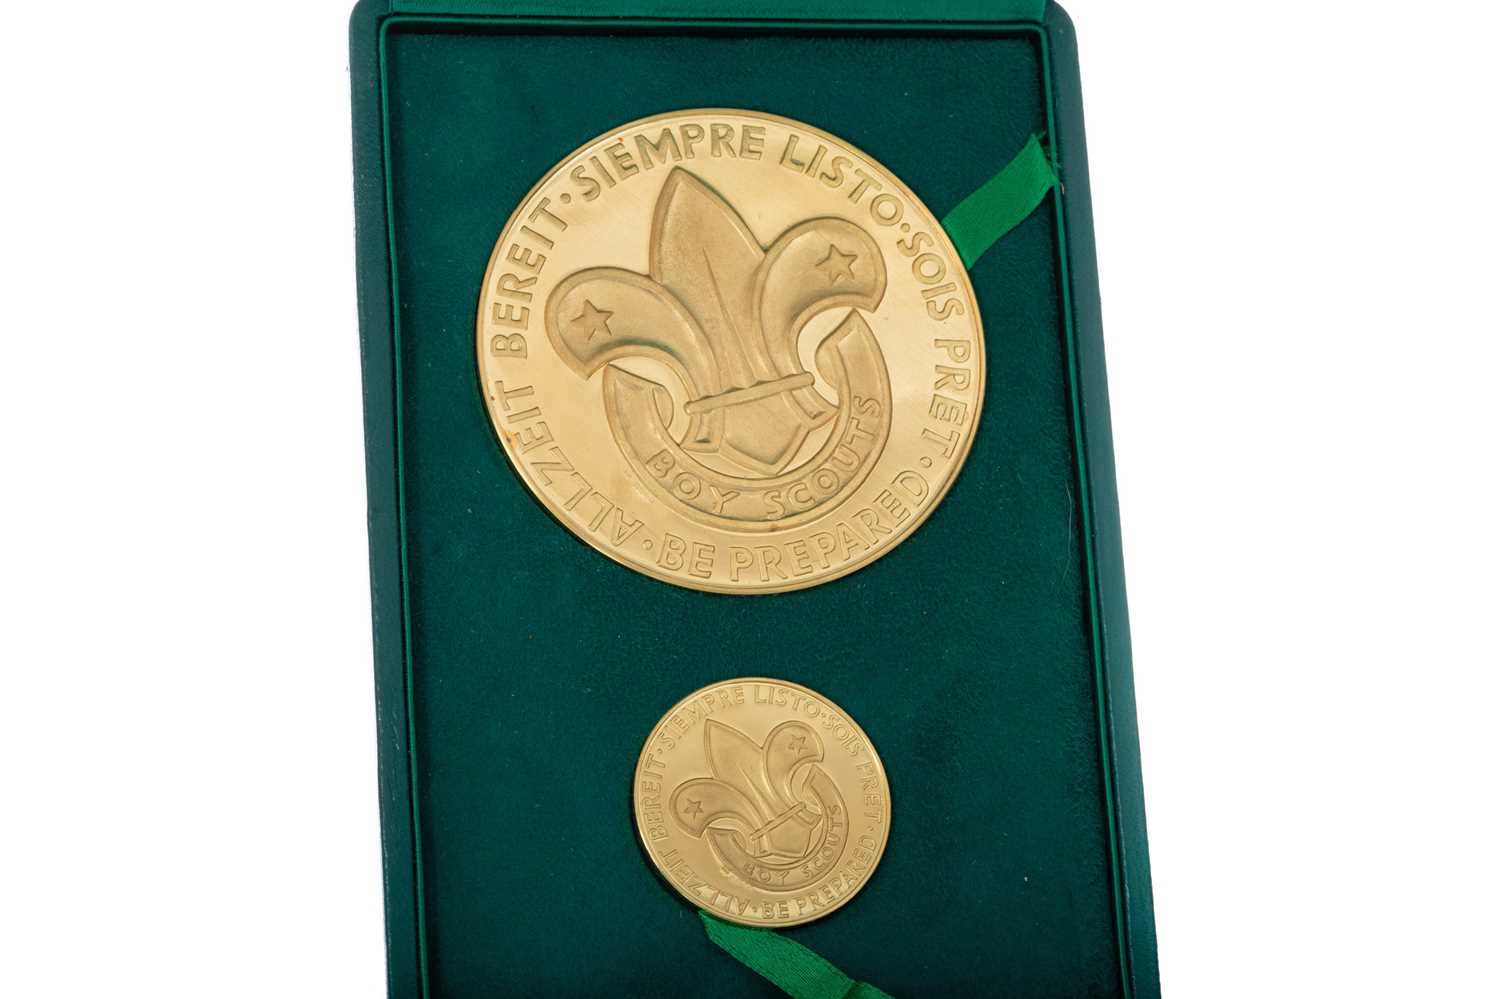 Lot 80 - 25th ANNIVERSARY OF THE DEATH OF LORD BADEN POWELL GOLD MEDALLION DUO